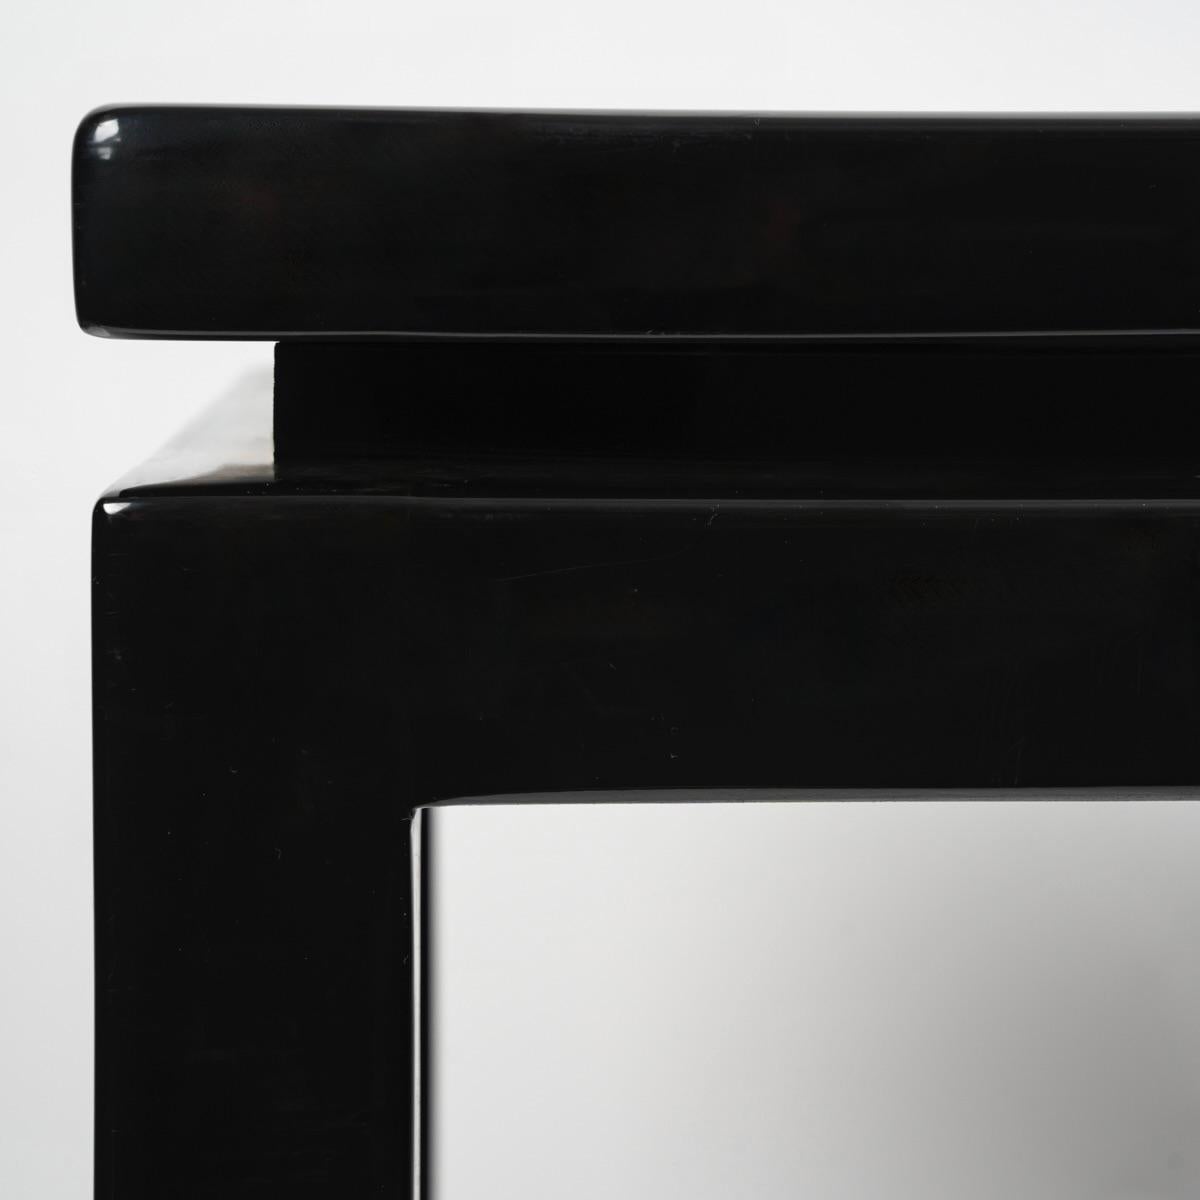 Large console table in black lacquer.
Composed of a long rectangular top resting on a recessed rectangle on which are positioned 4 high rectangular section legs positioned at the four corners of the console.
Details on the bottom of the legs and the